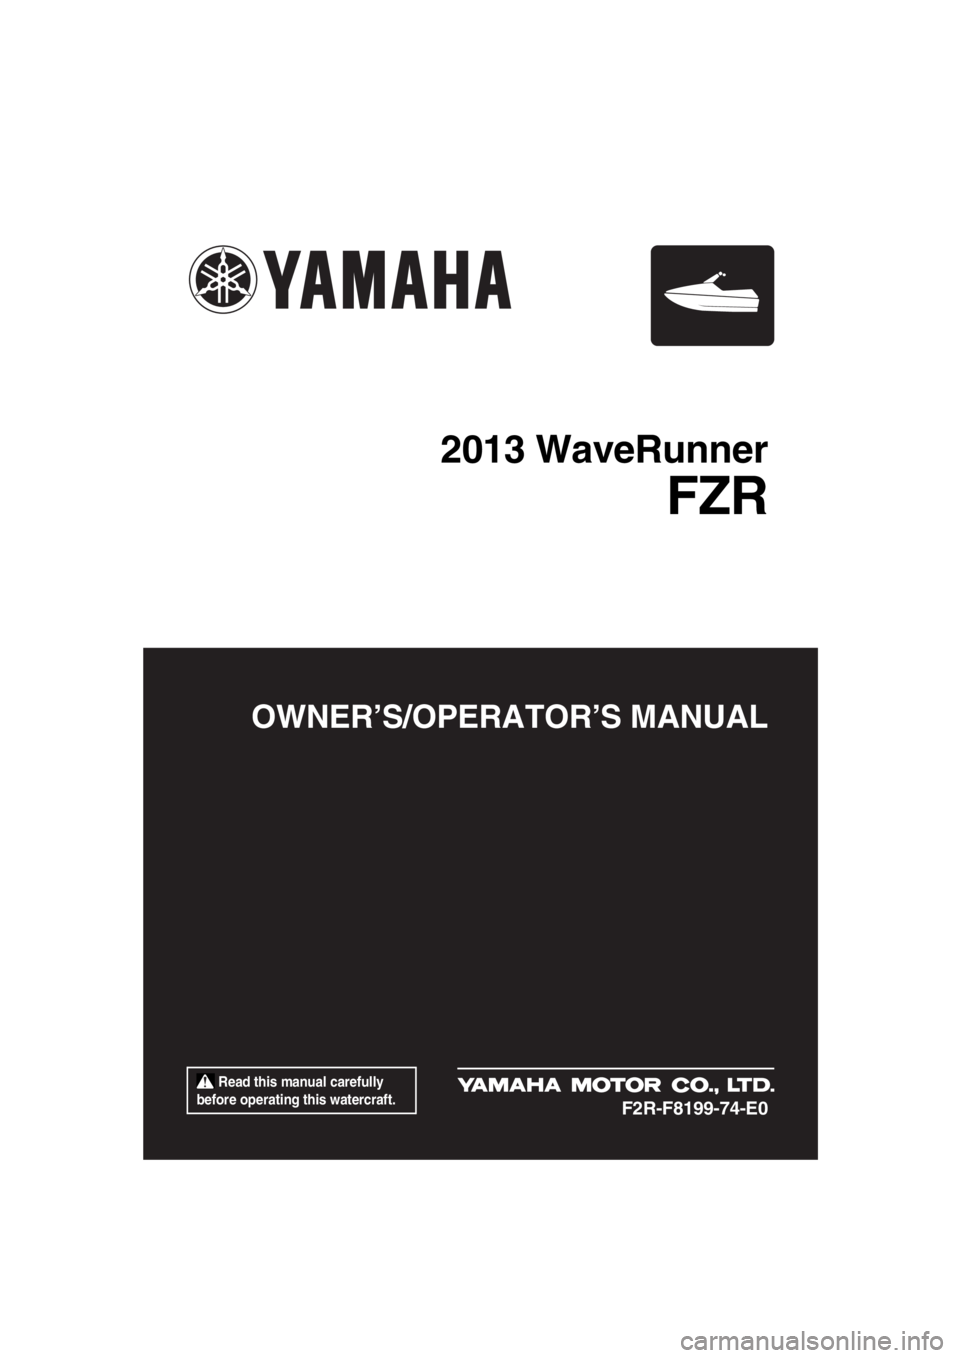 YAMAHA FZR SVHO 2013  Owners Manual  Read this manual carefully 
before operating this watercraft.
OWNER’S/OPERATOR’S MANUAL
2013 WaveRunner
FZR
F2R-F8199-74-E0
UF2R74E0.book  Page 1  Wednesday, August 22, 2012  2:26 PM 